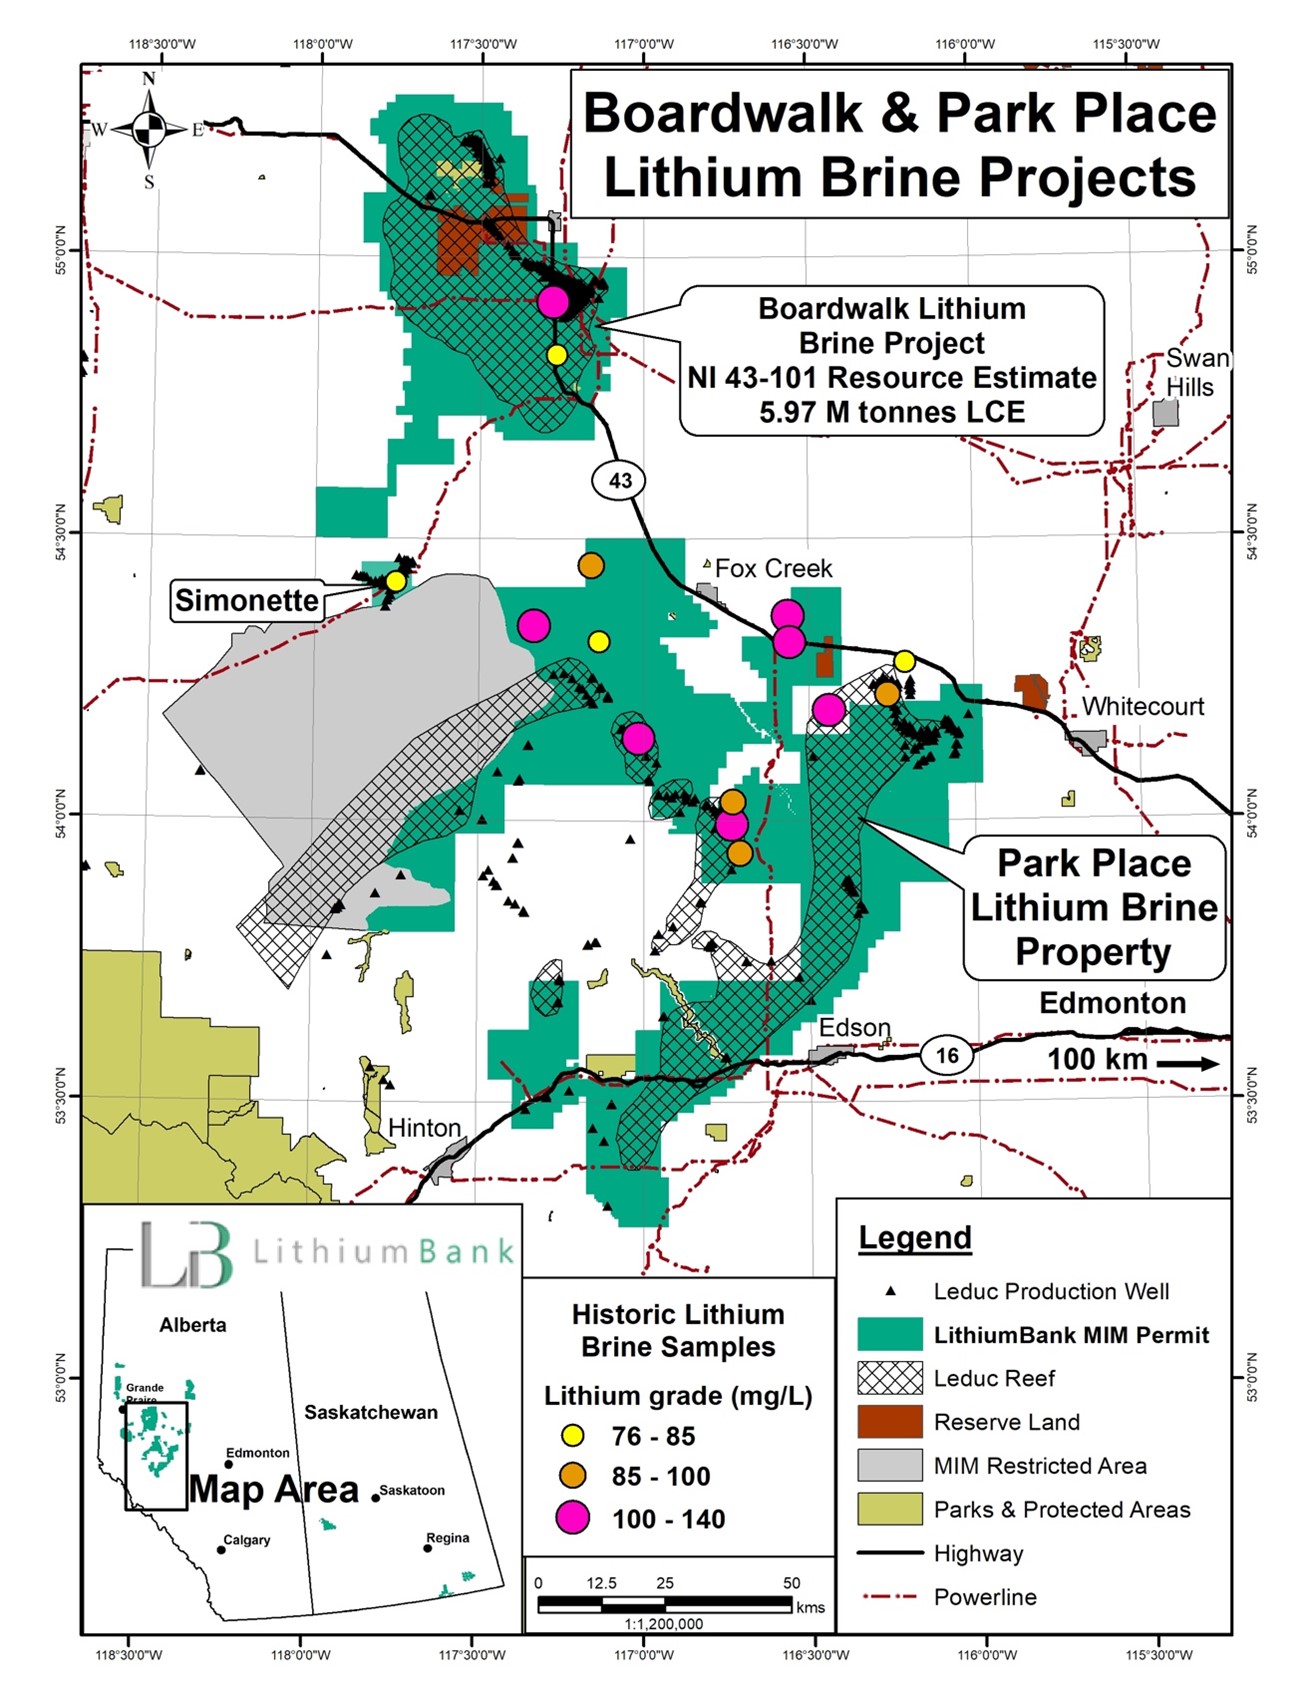 Location of historic lithium brine samples from LithiumBank’s Park Place Lithium Brine Project